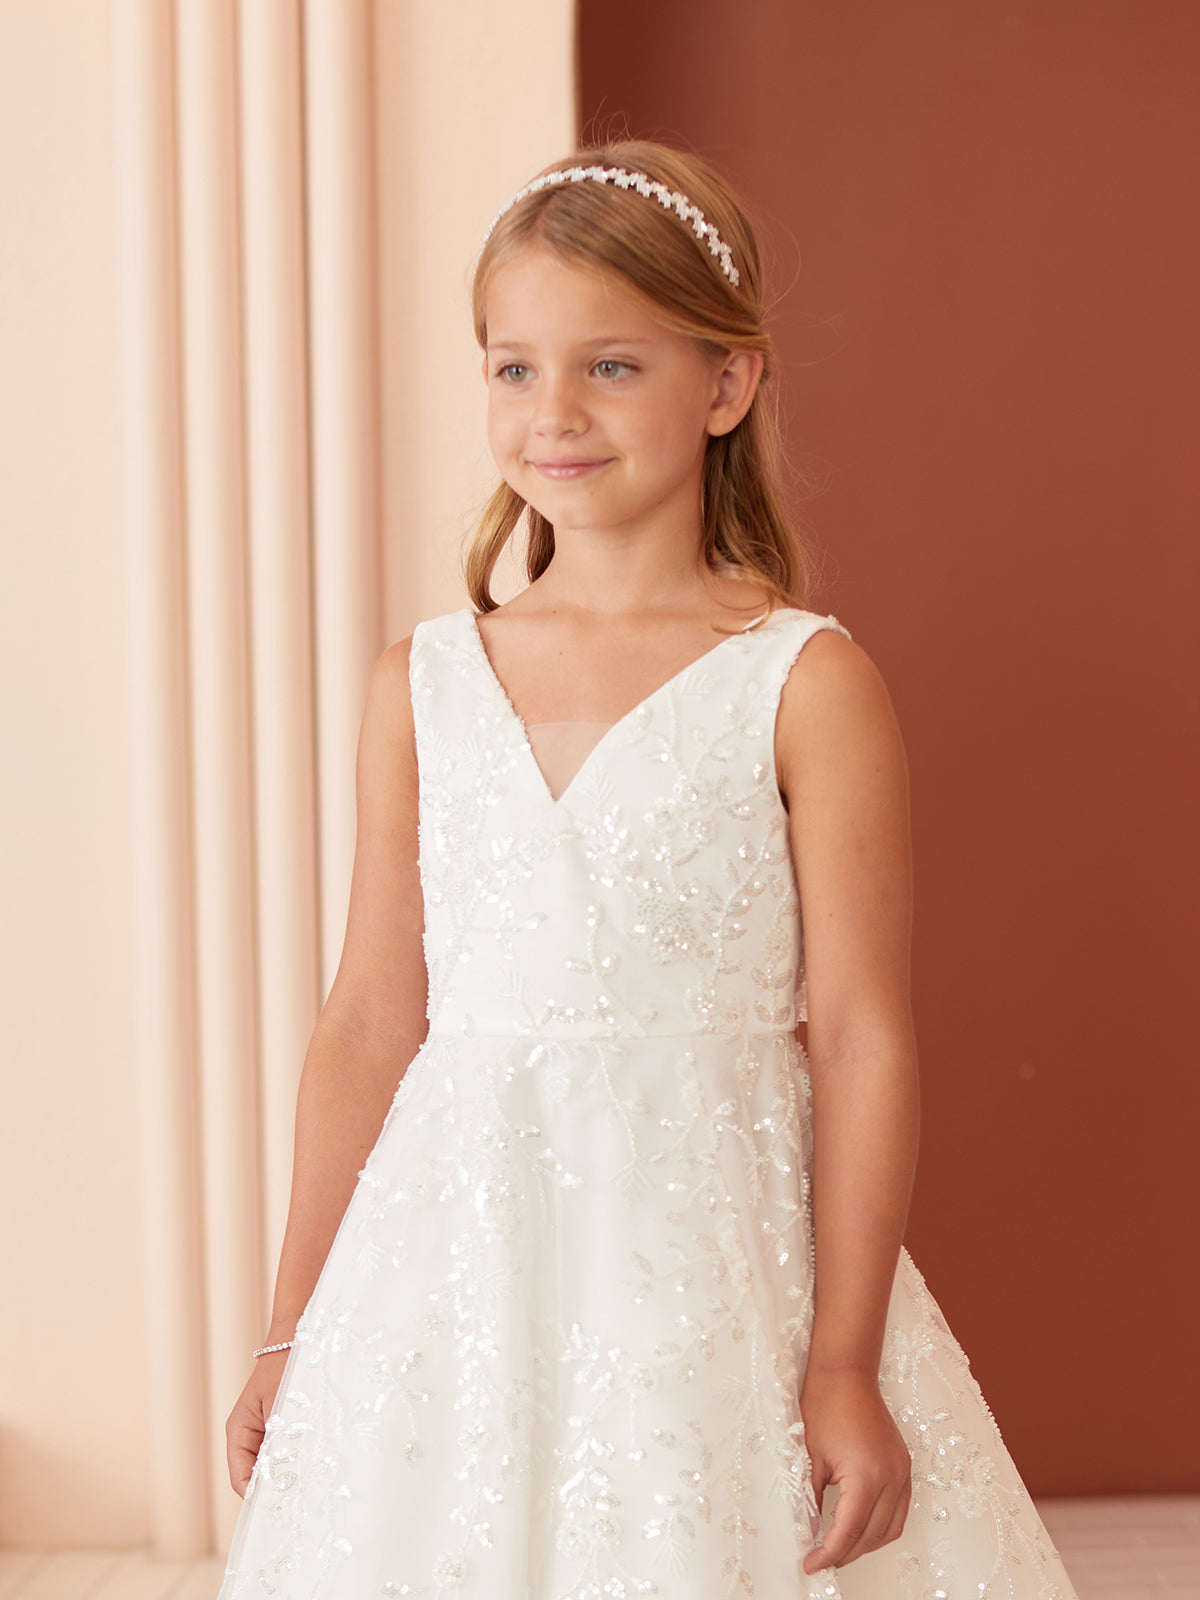 Embroidered Sequin V-Neckline Flowers Girl Dress by TIPTOP KIDS - AS5854